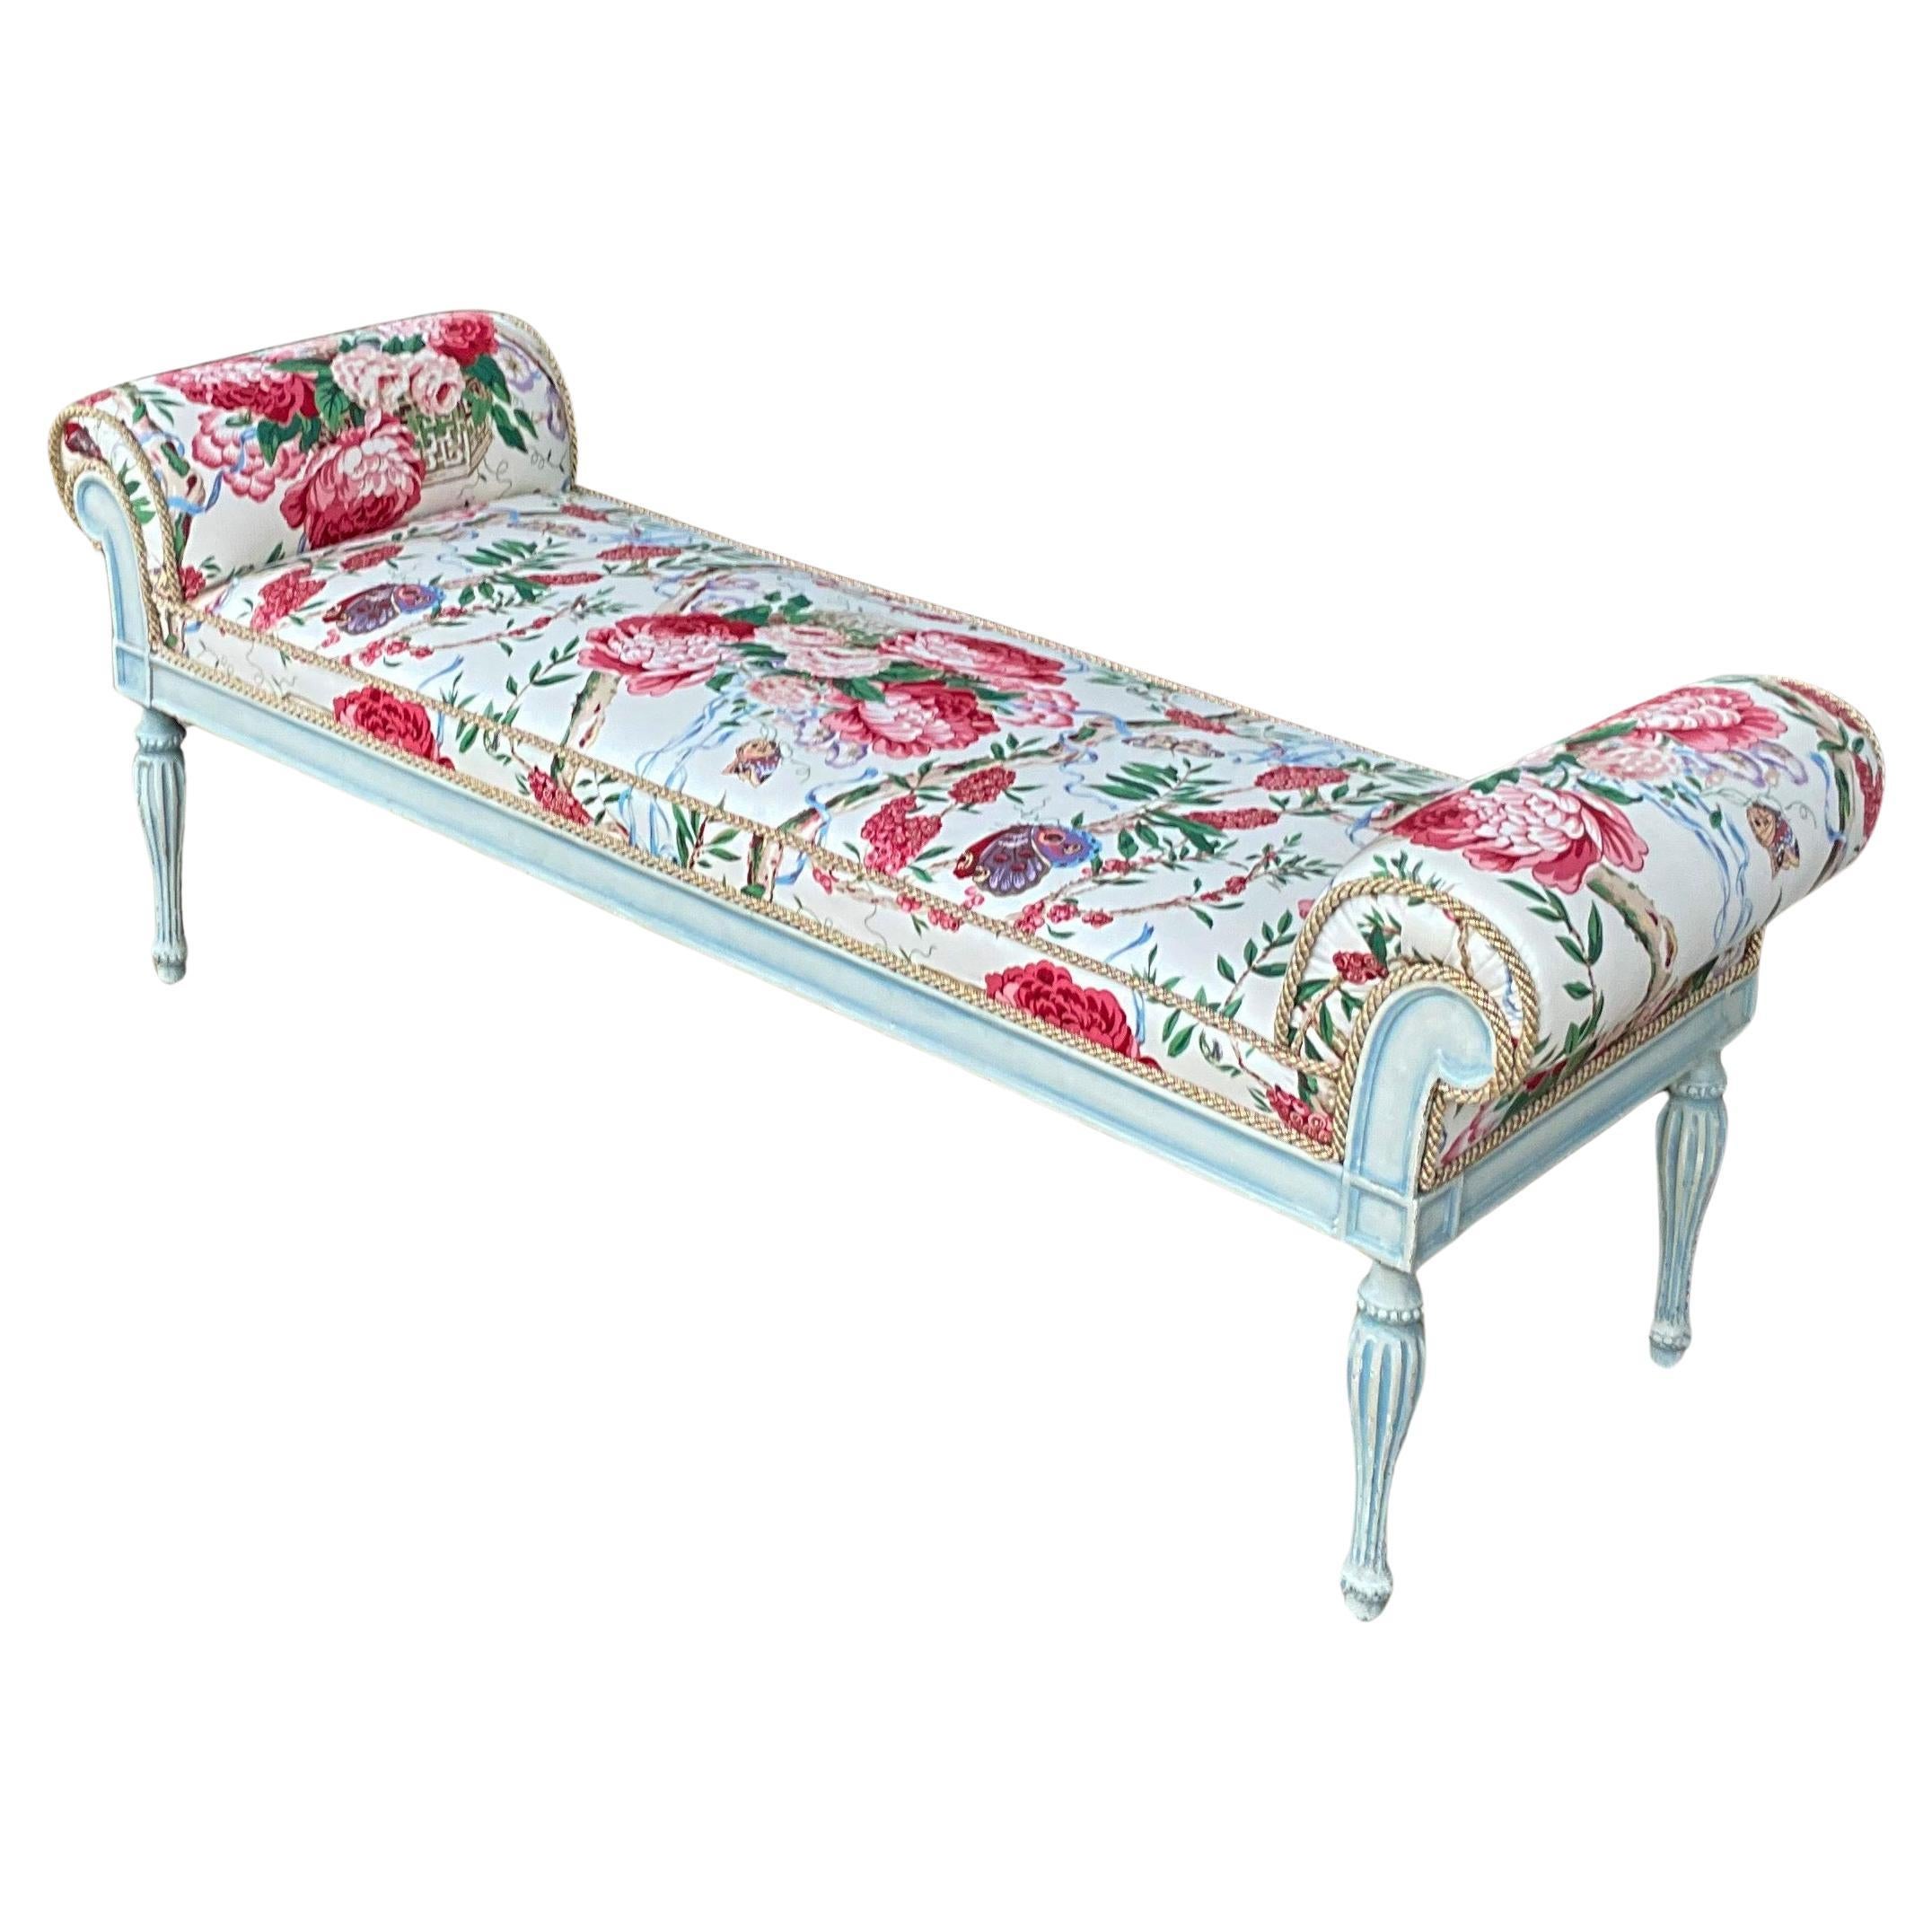 This is a lovely French style blue and white painted bench with vintage floral cotton chintz upholstery. The upholstery is in very good condition. It is unmarked.

